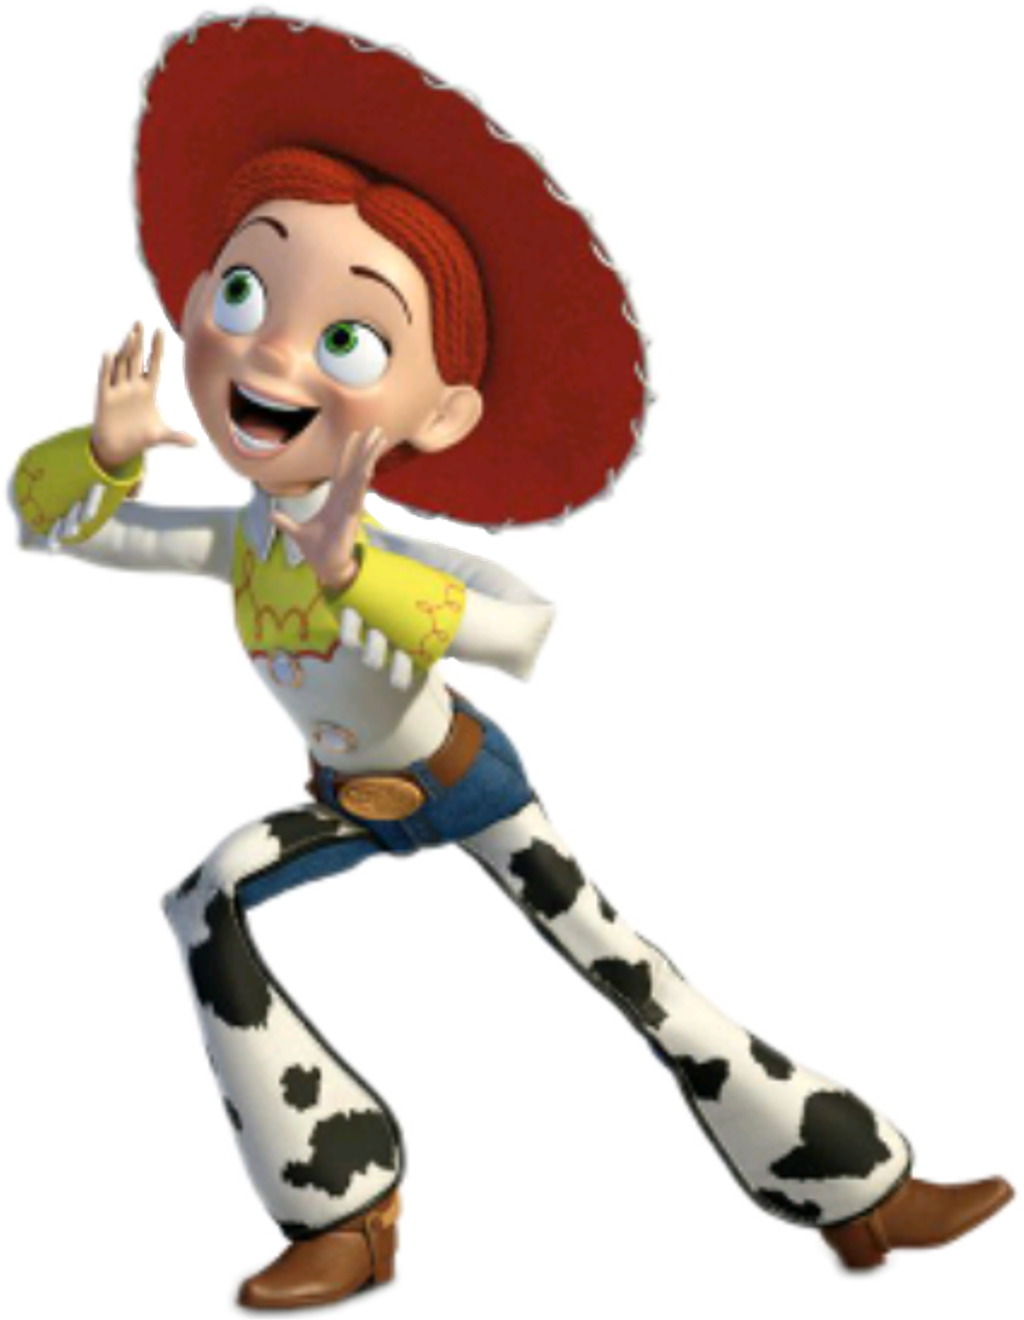 Reportar Abuso - Toy Story Personnage Fille (1024x1320)